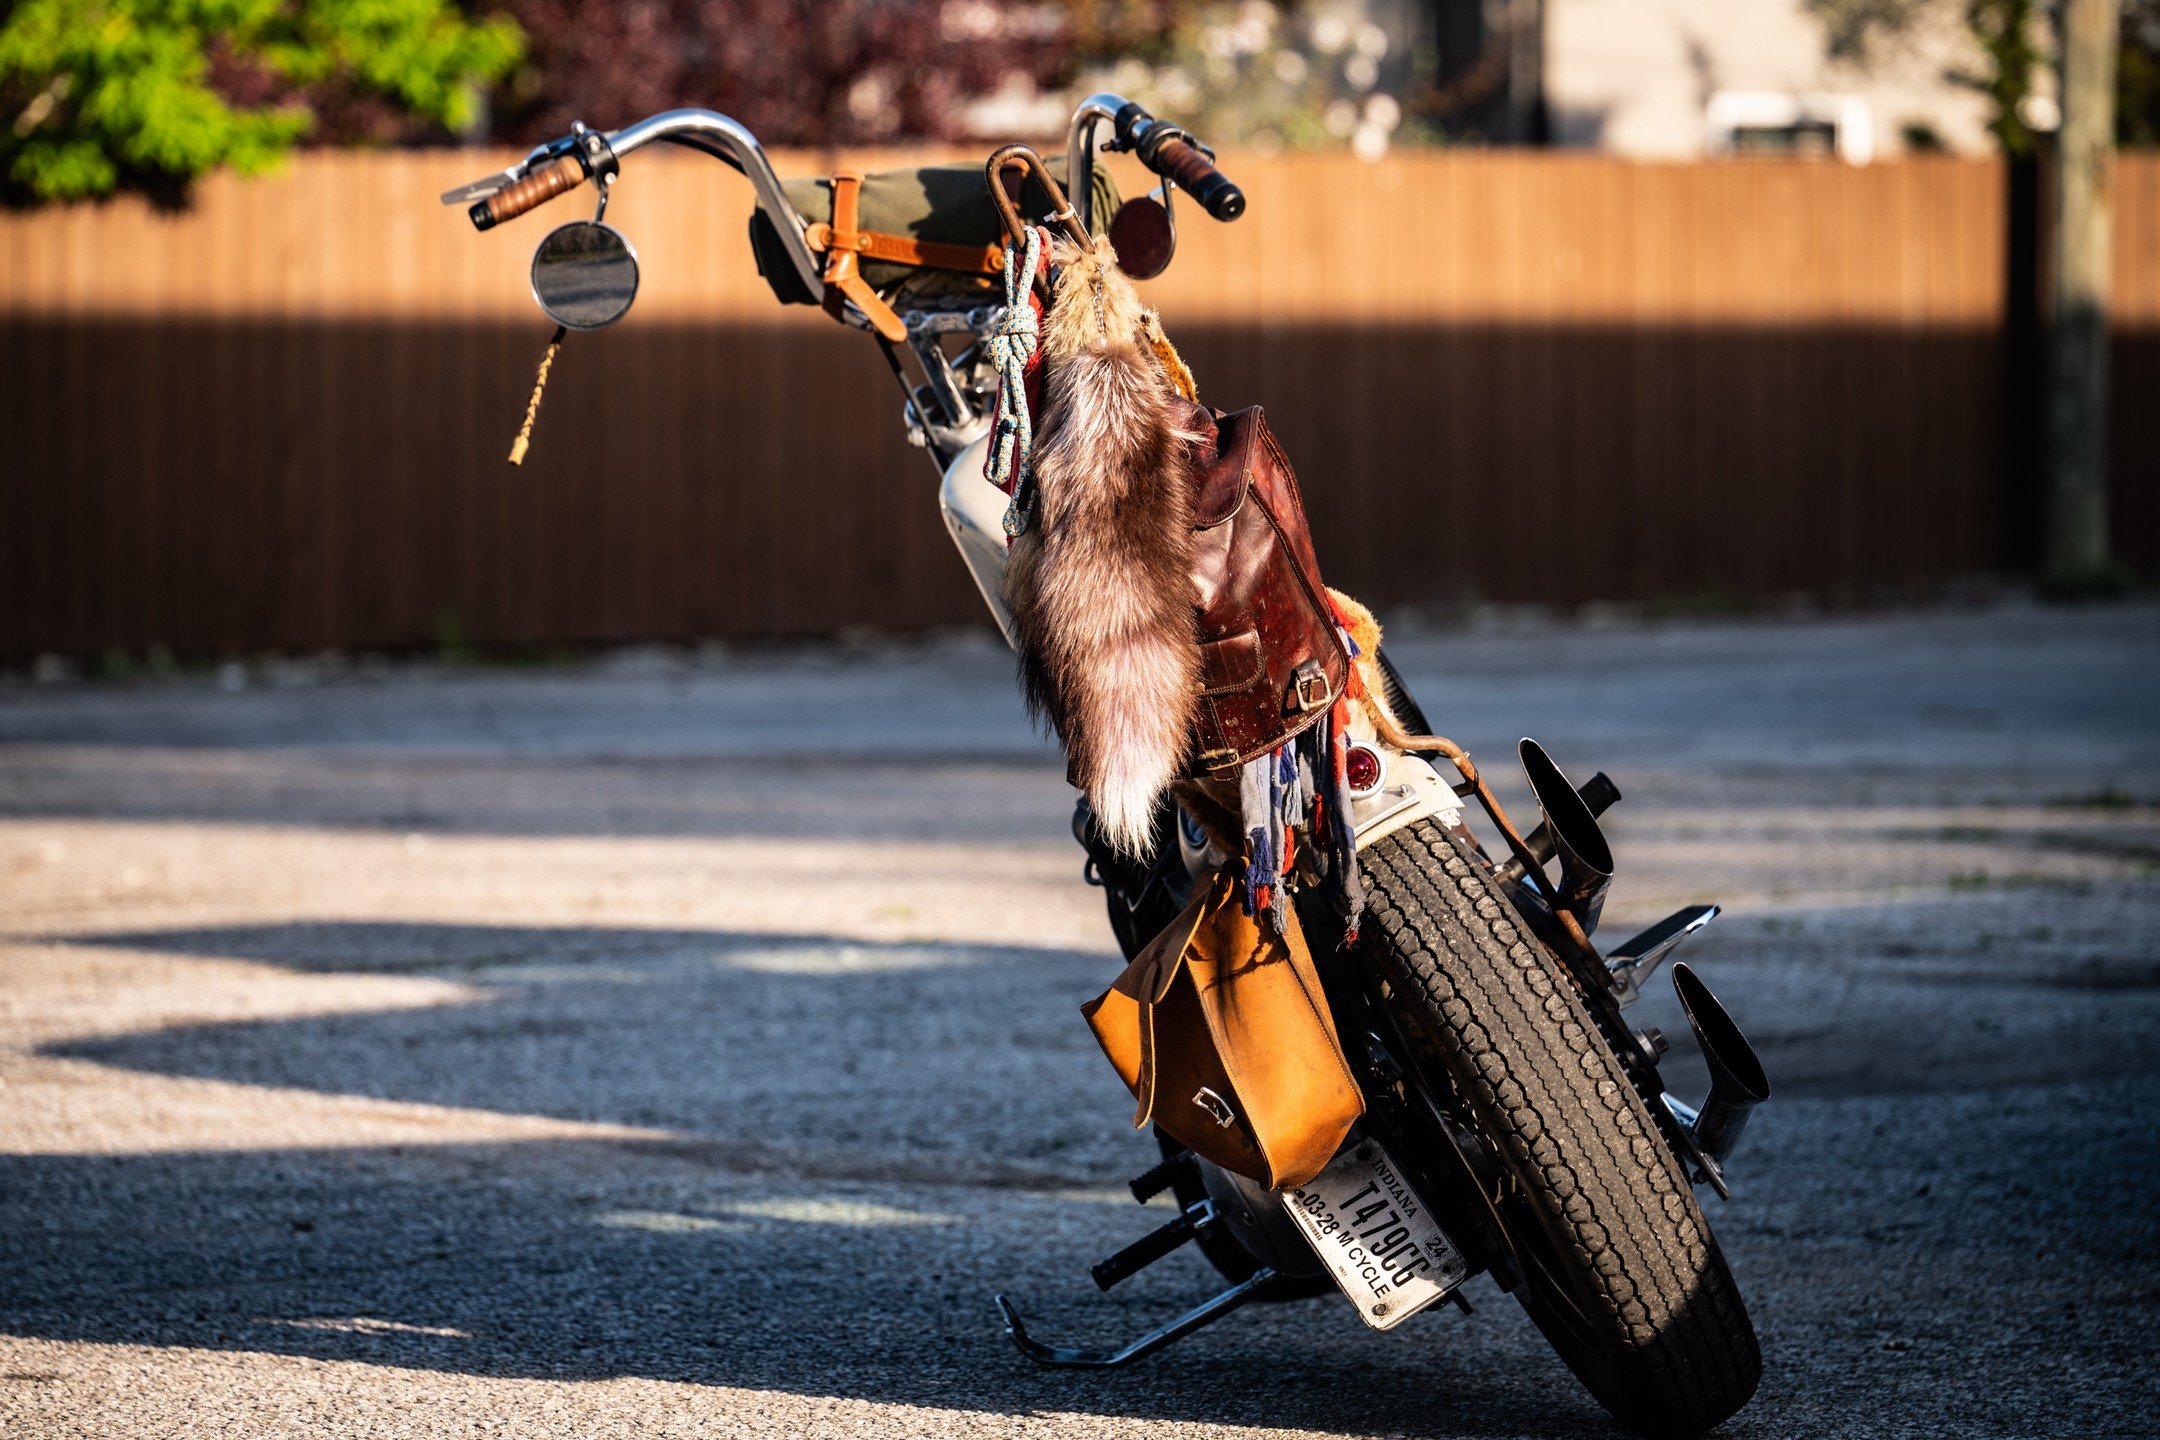 ALLEYS OF MADISON: Camrun's motorcycle for a second go-round. I knew someone could tell me whose moto this was! #freewheelstudios #alleysofmadisonindiana #chopper